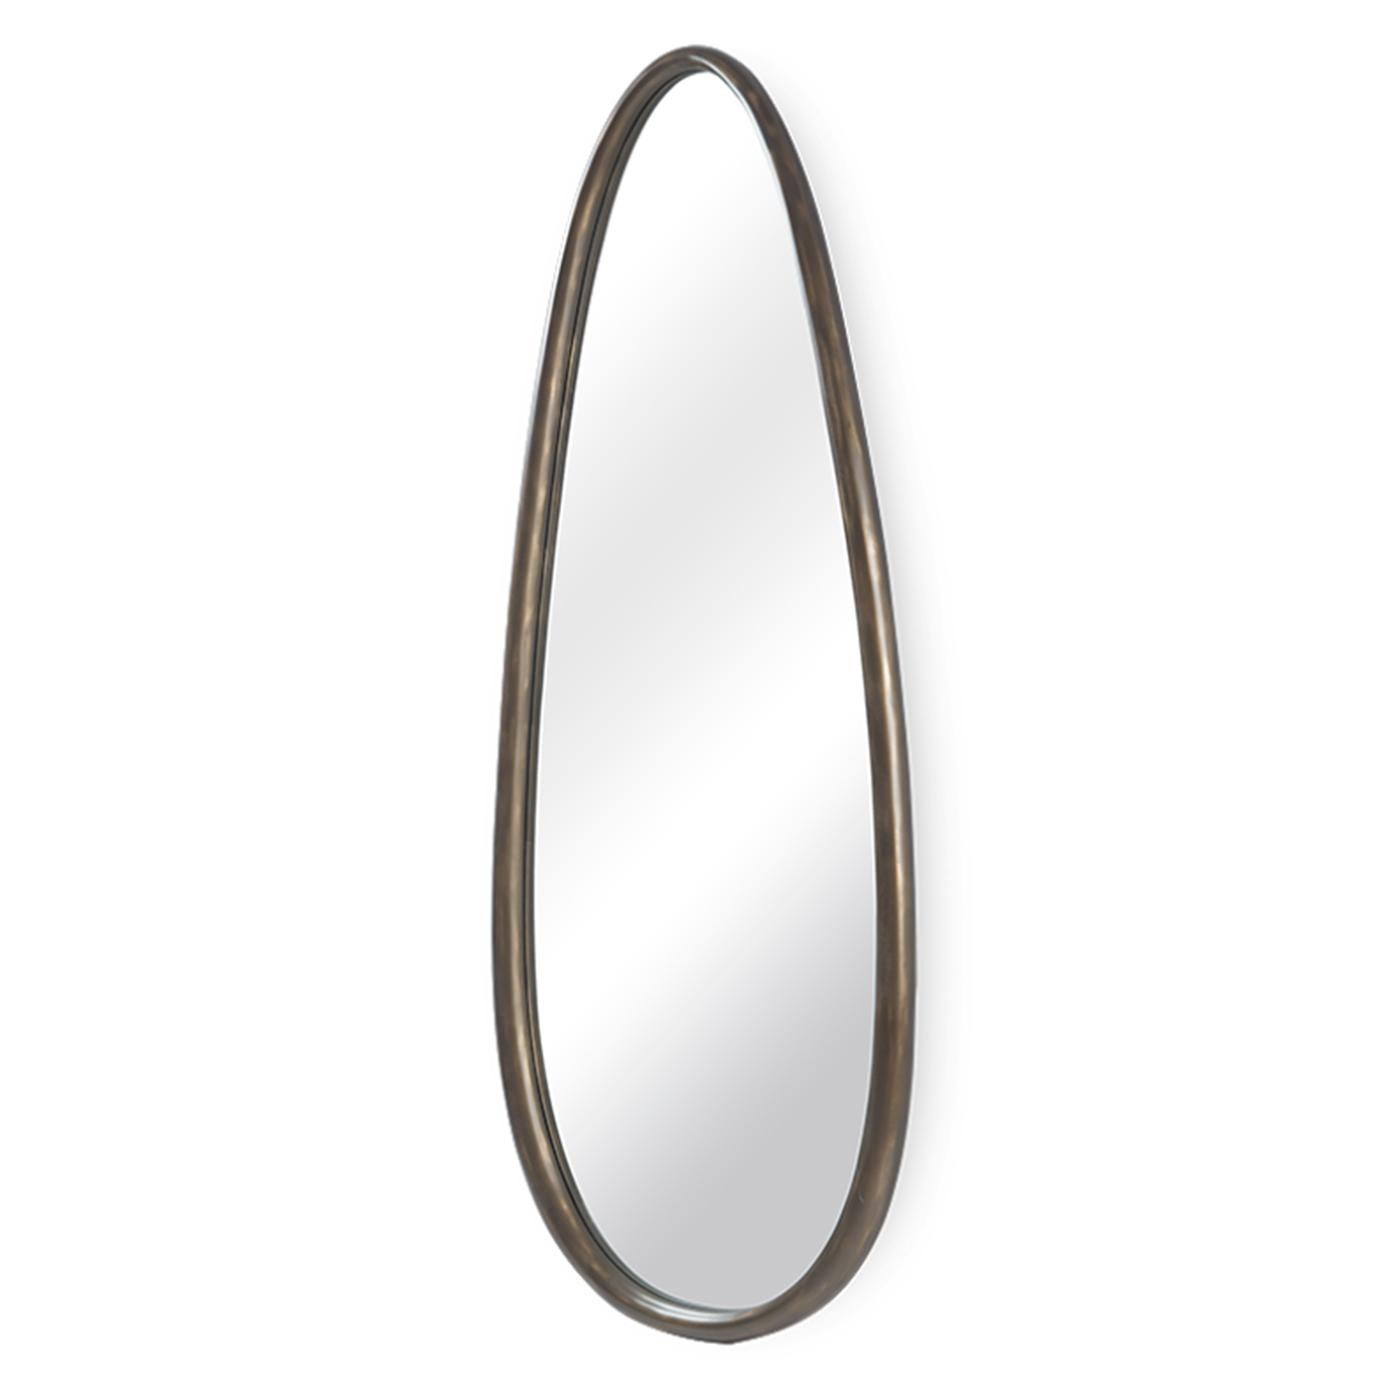 English Tolens Mirror For Sale